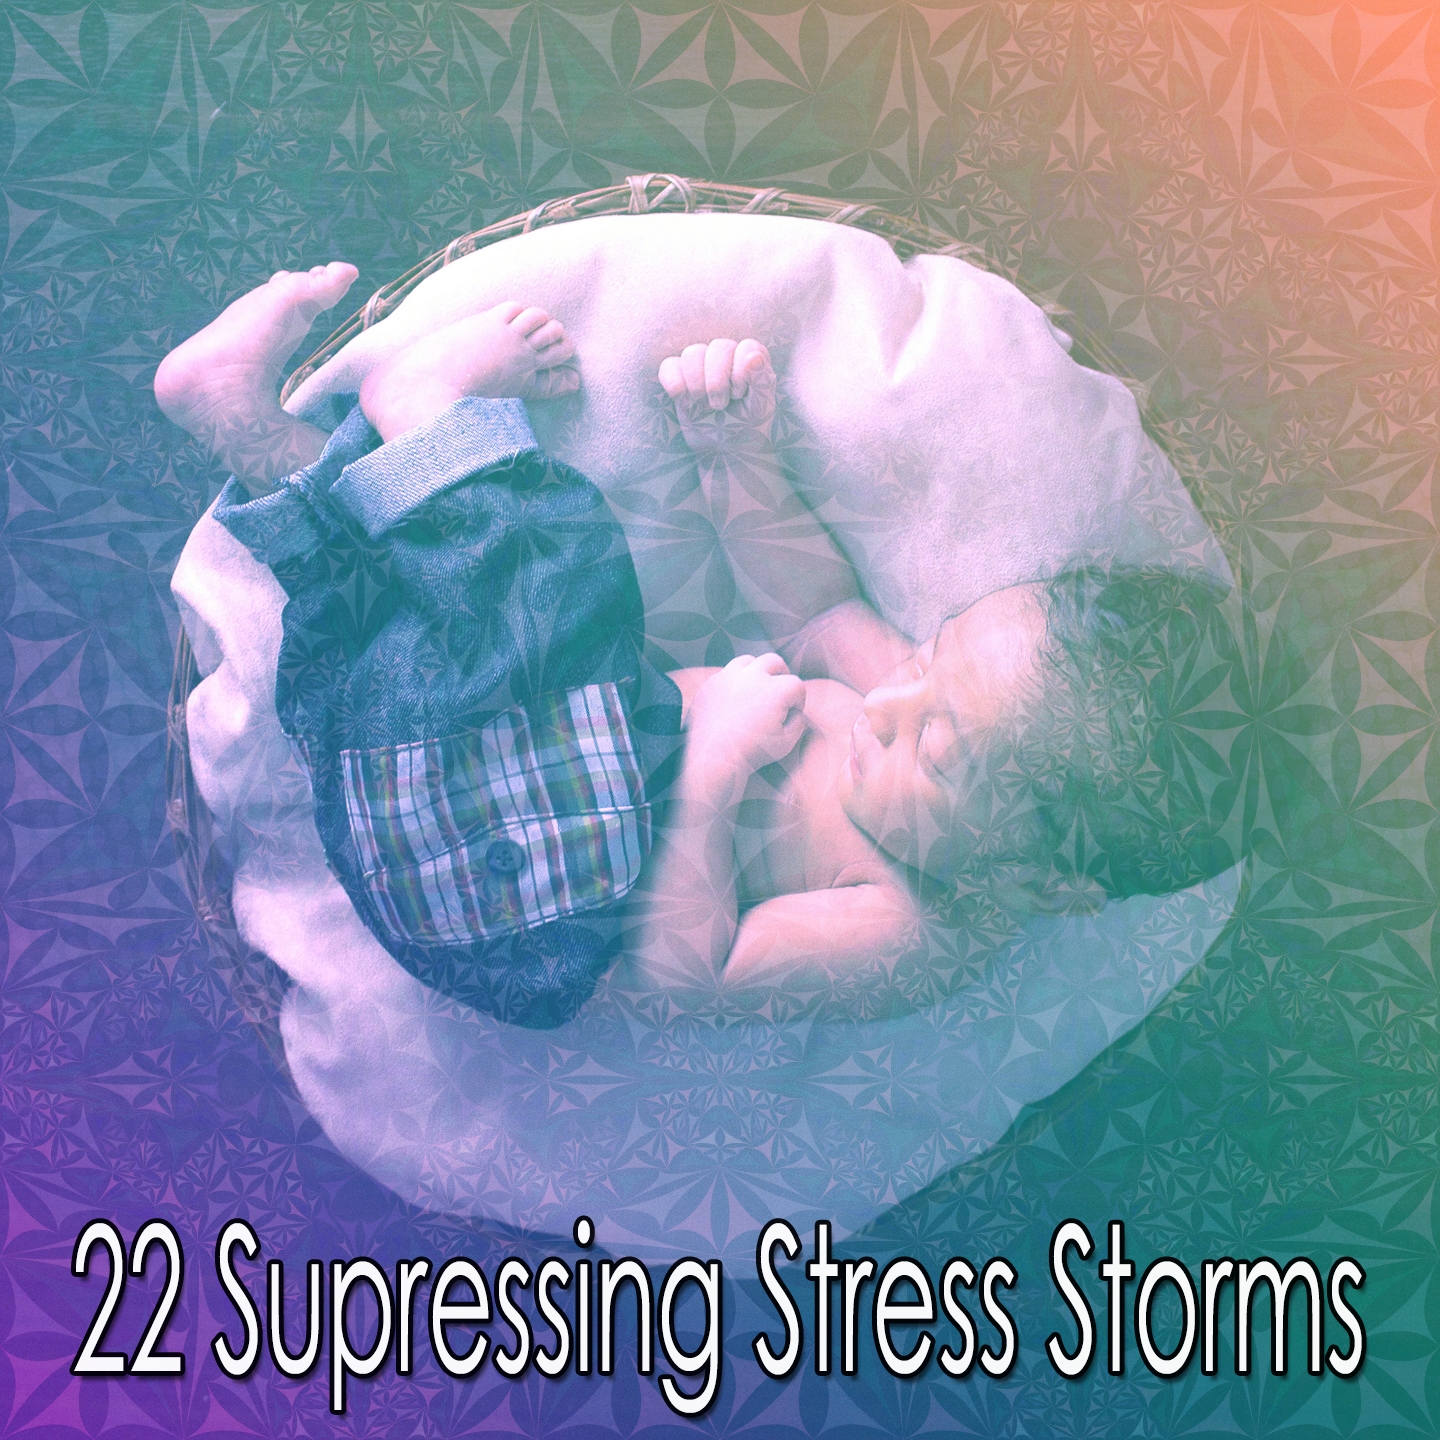 22 Supressing Stress Storms